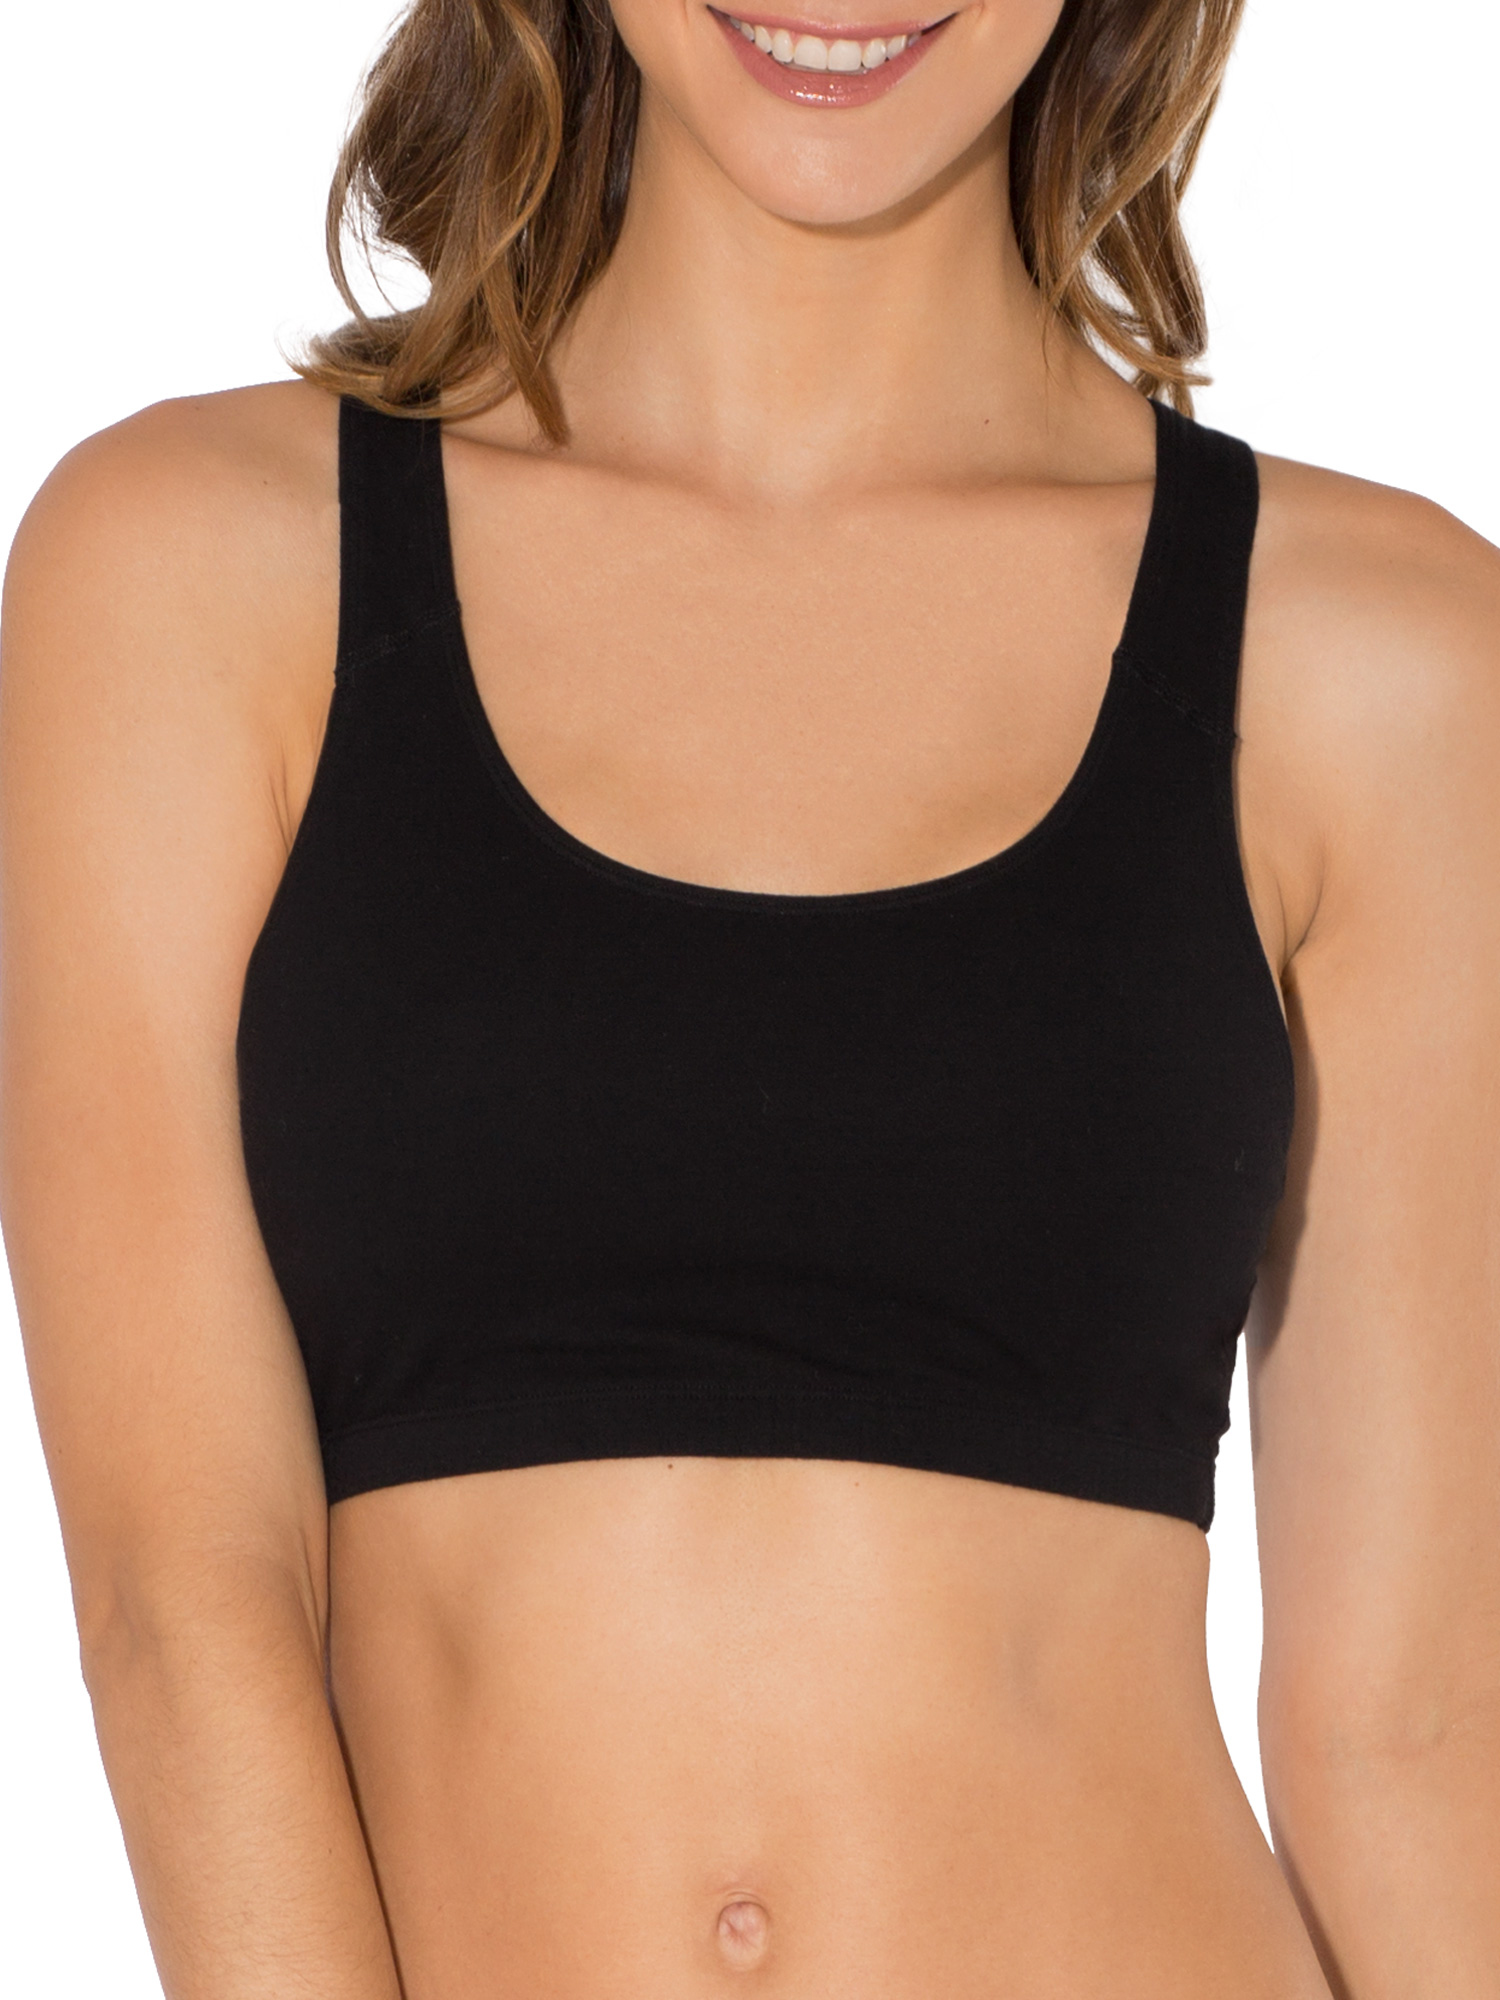 Fruit of the Loom Women's Racerback Style Cotton Sports Bra, 3-Pack, Style-9012 - image 4 of 8